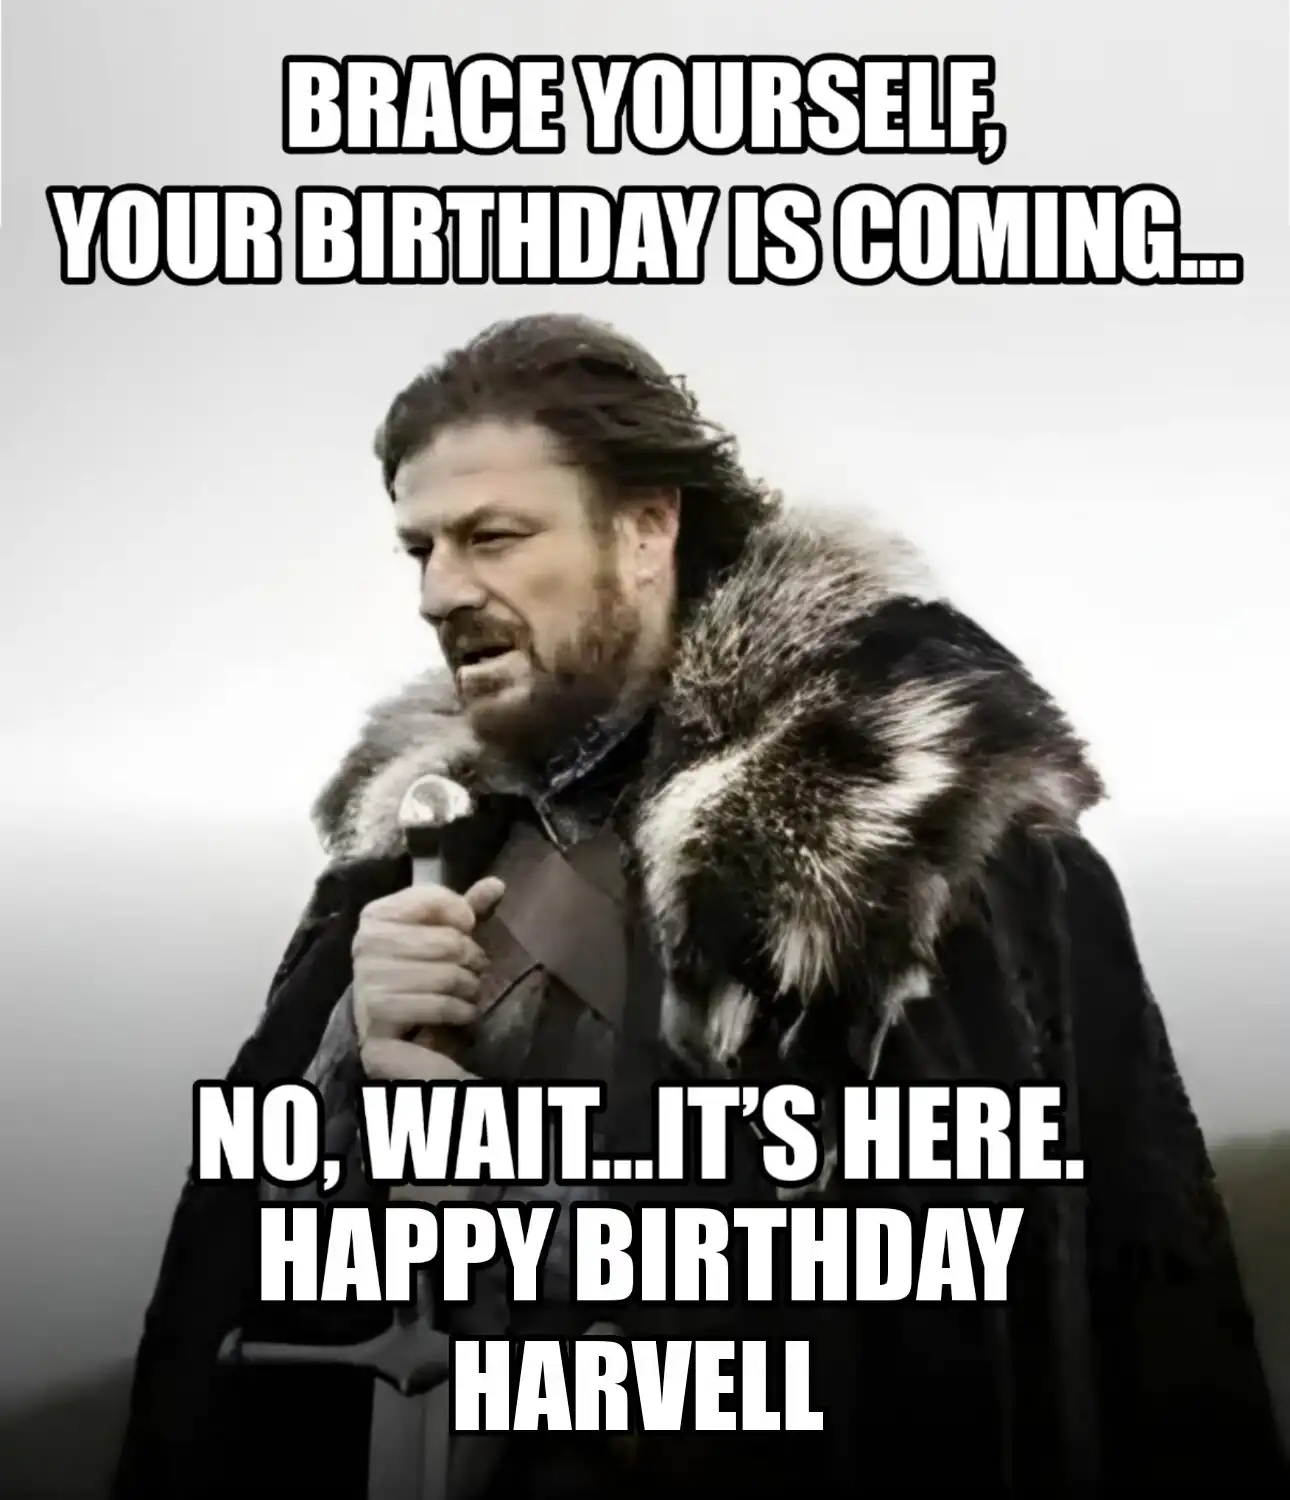 Happy Birthday Harvell Brace Yourself Your Birthday Is Coming Meme